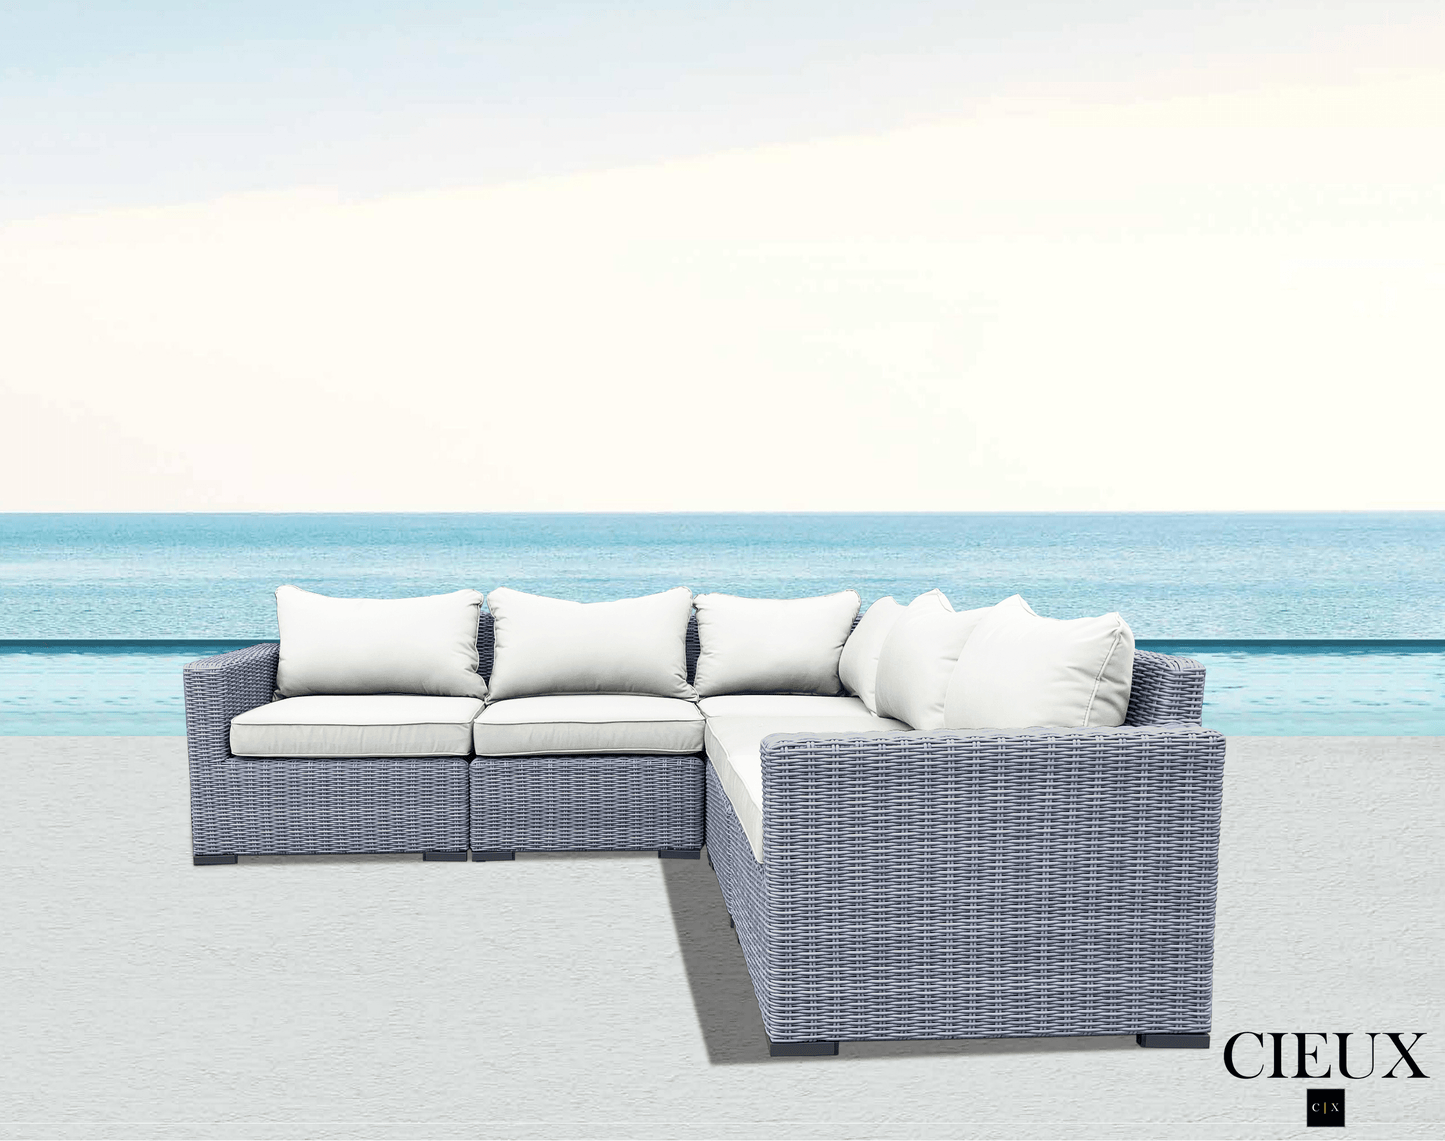 Pending - Cieux Cannes Outdoor Patio Wicker Modular Corner Sectional Sofa in Grey with Sunbrella Cushions - Available in 2 Colours